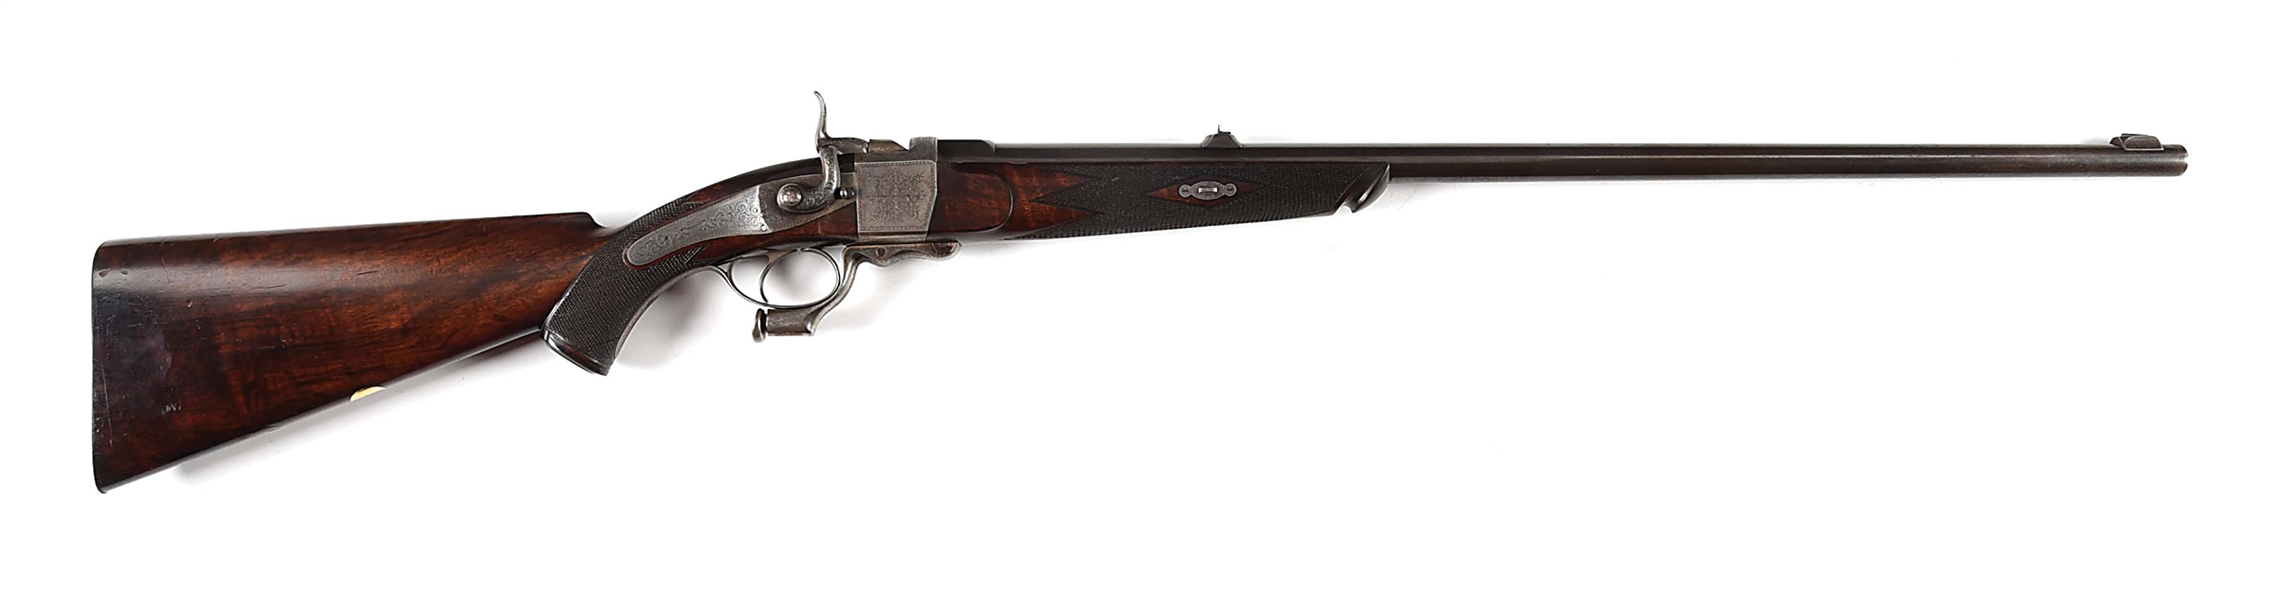 (A) ALEXANDER HENRY DROP LOCK SINGLE SHOT RIFLE IN .450 3 - 1/4" BPE WITH ORIGINAL CASE.